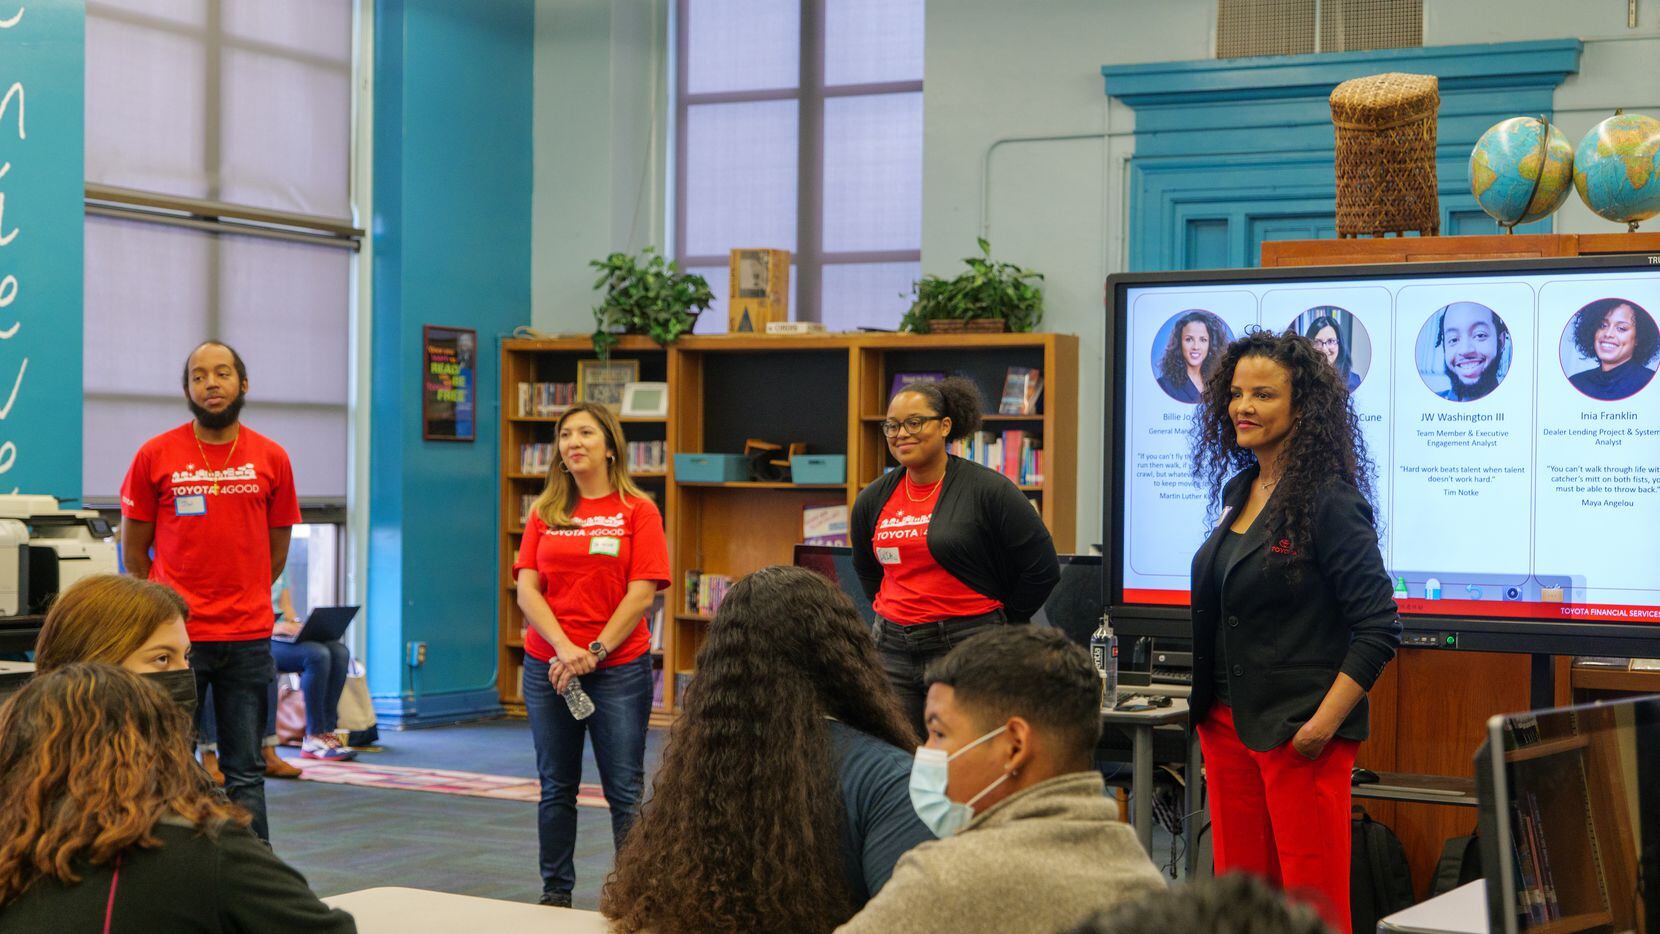 Volunteers present to a group of students during a career day event